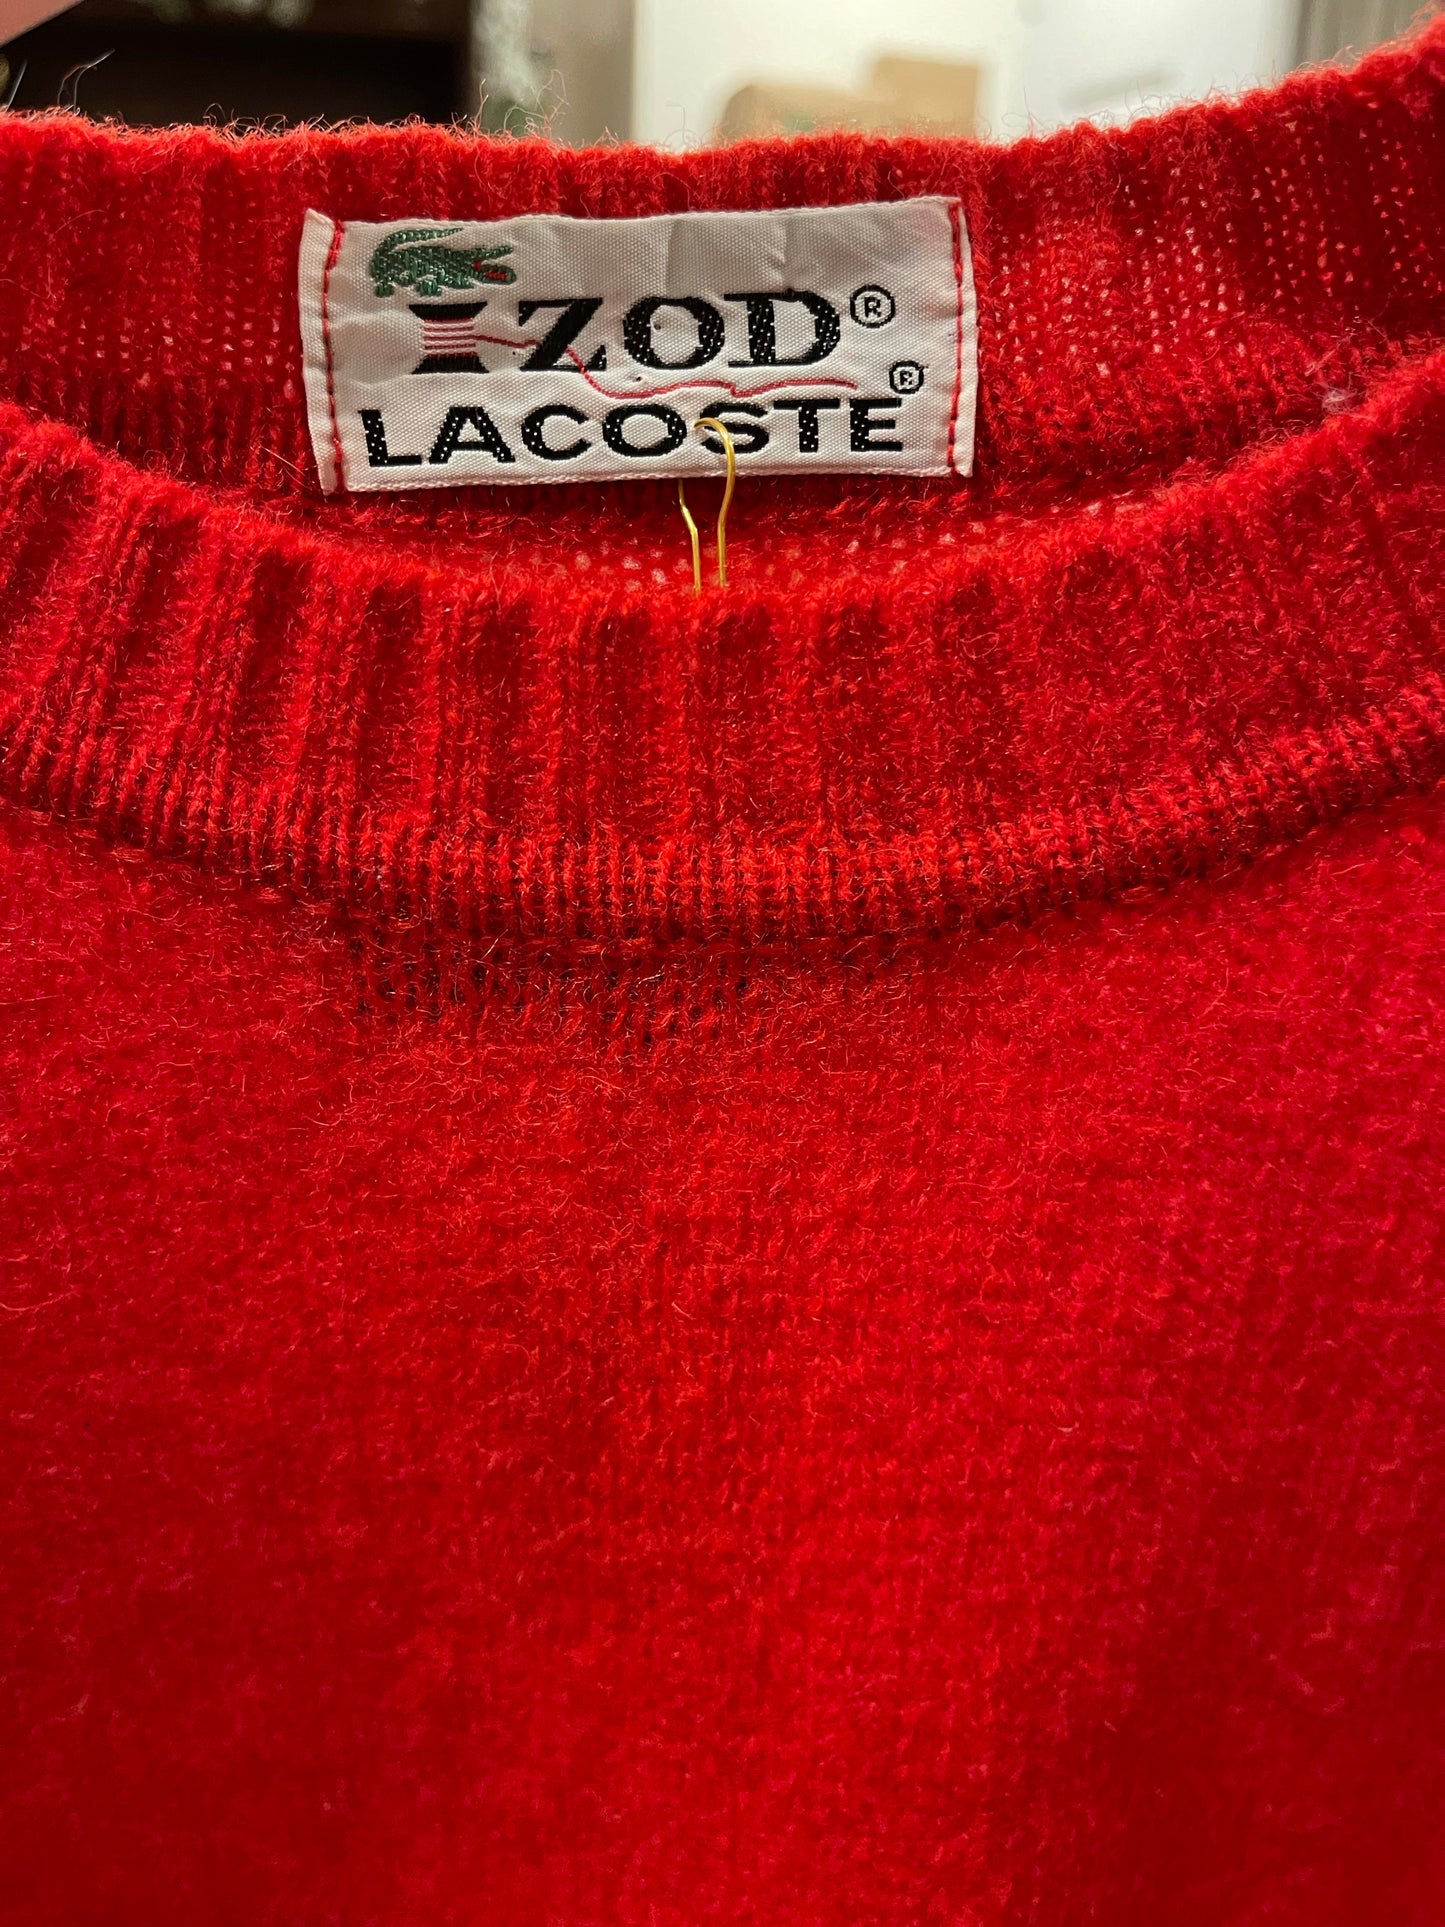 Lacoste Sweater, 1970's